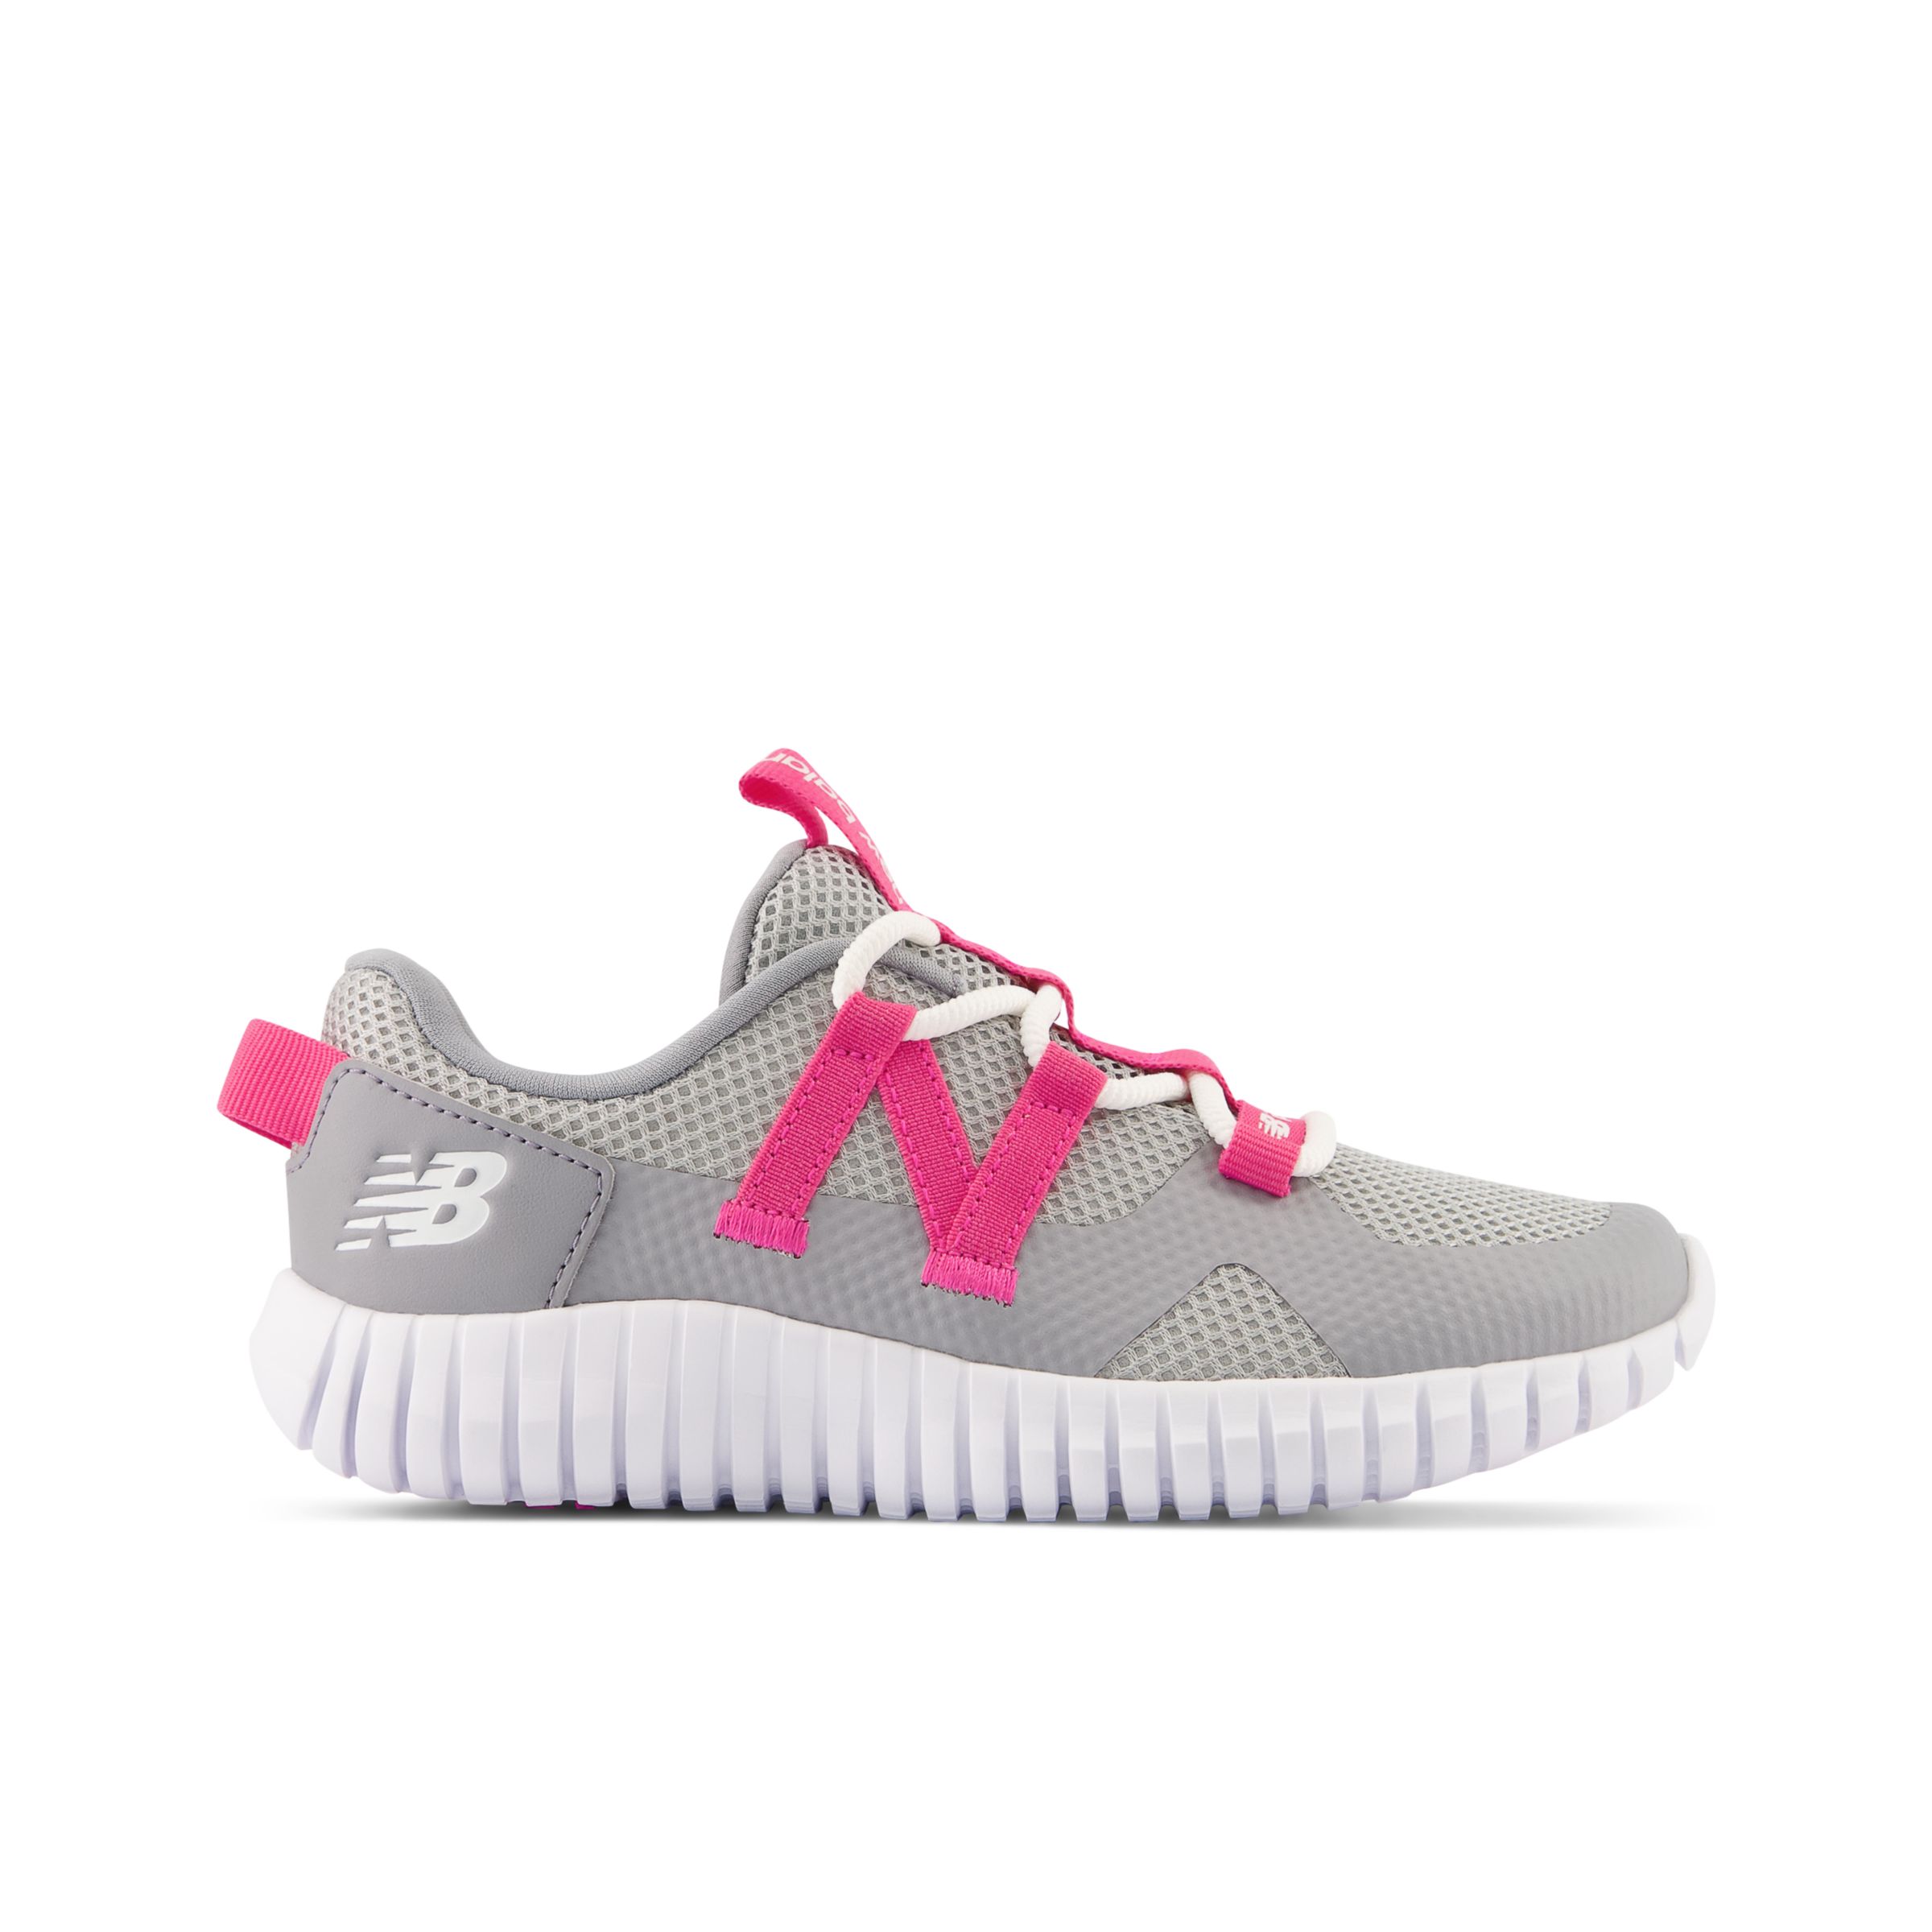 Grey with Pinkproduct image